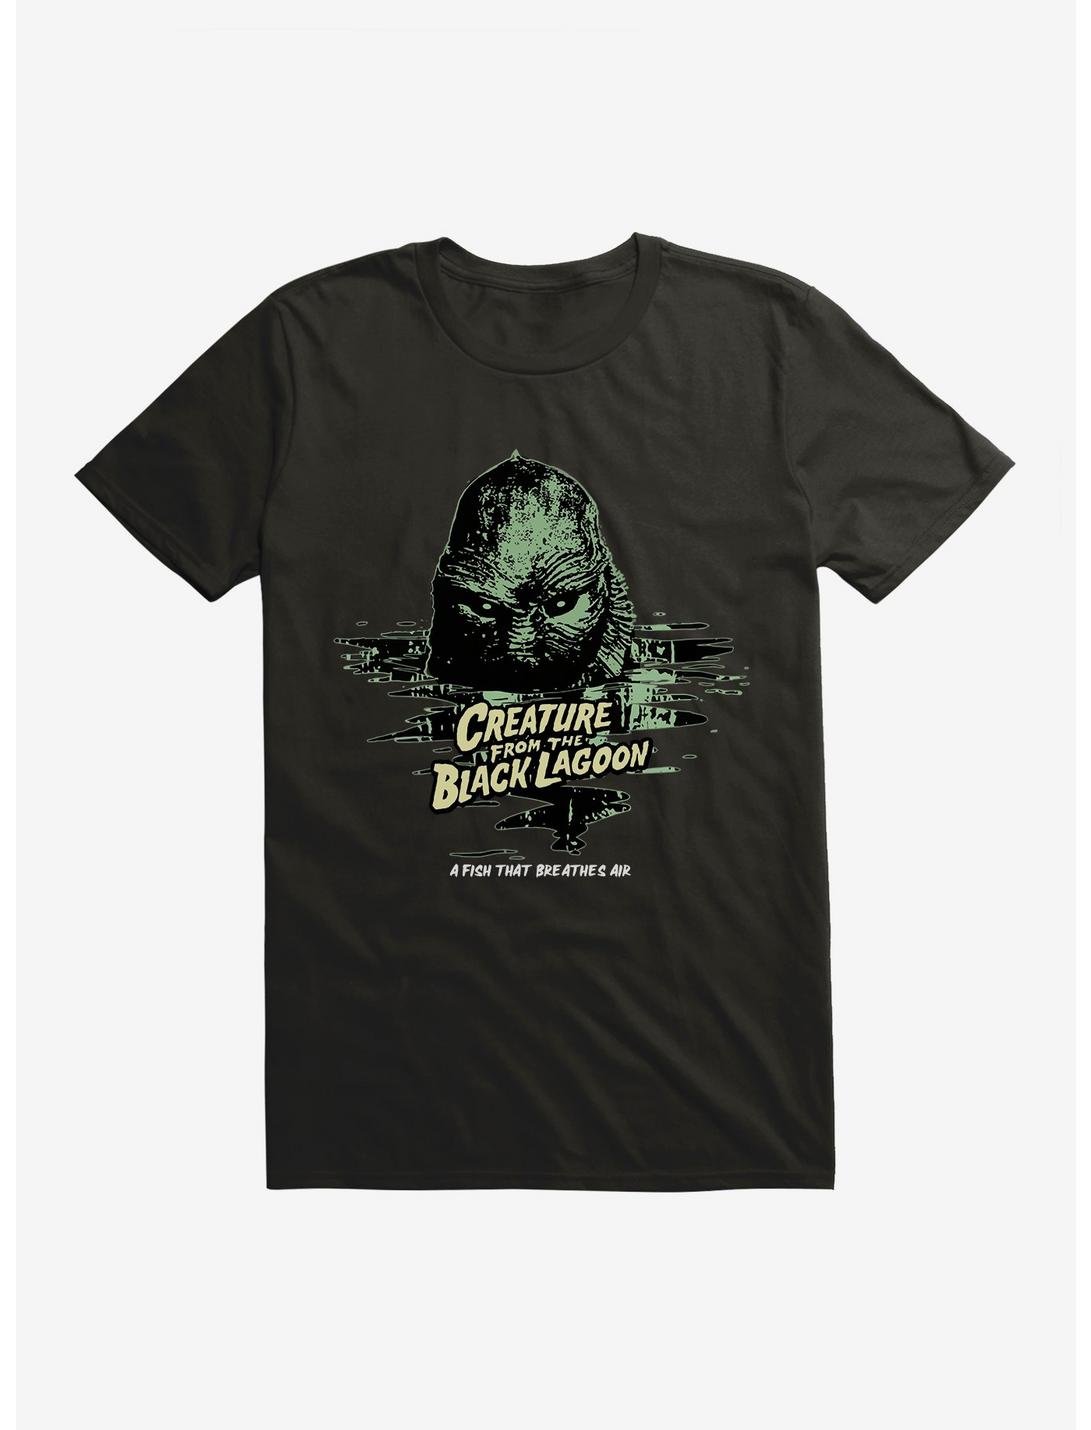 Creature From The Black Lagoon Fish That Breathes Air T-Shirt, BLACK, hi-res